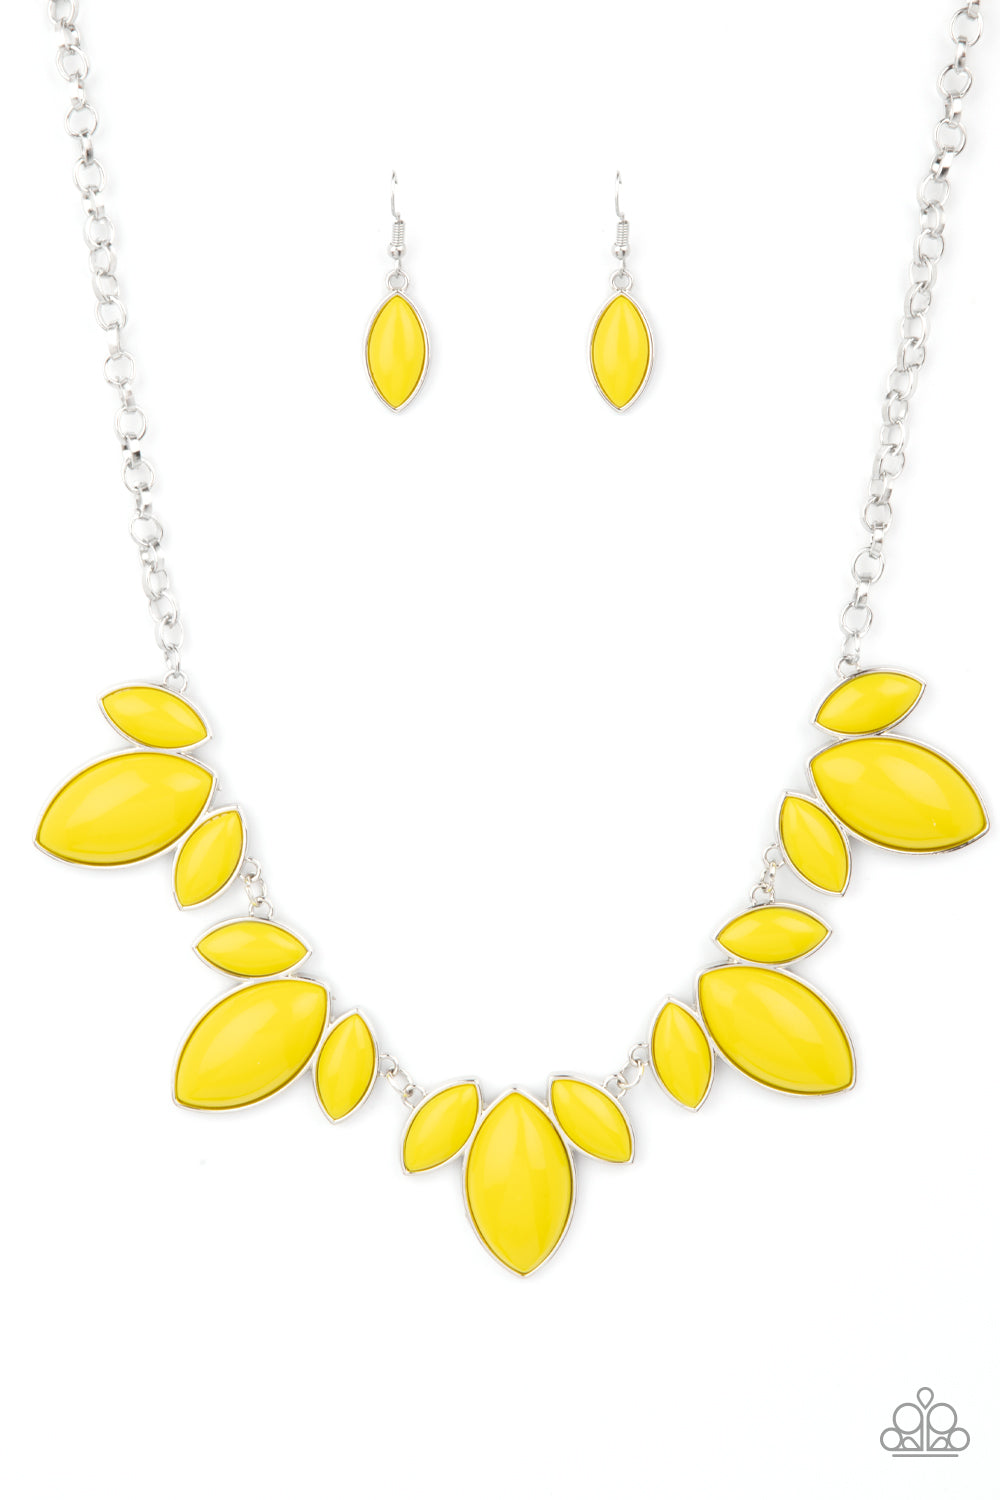 On The Fly - Yellow and Silver Necklace - Paparazzi Accessories – Bejeweled  Accessories By Kristie